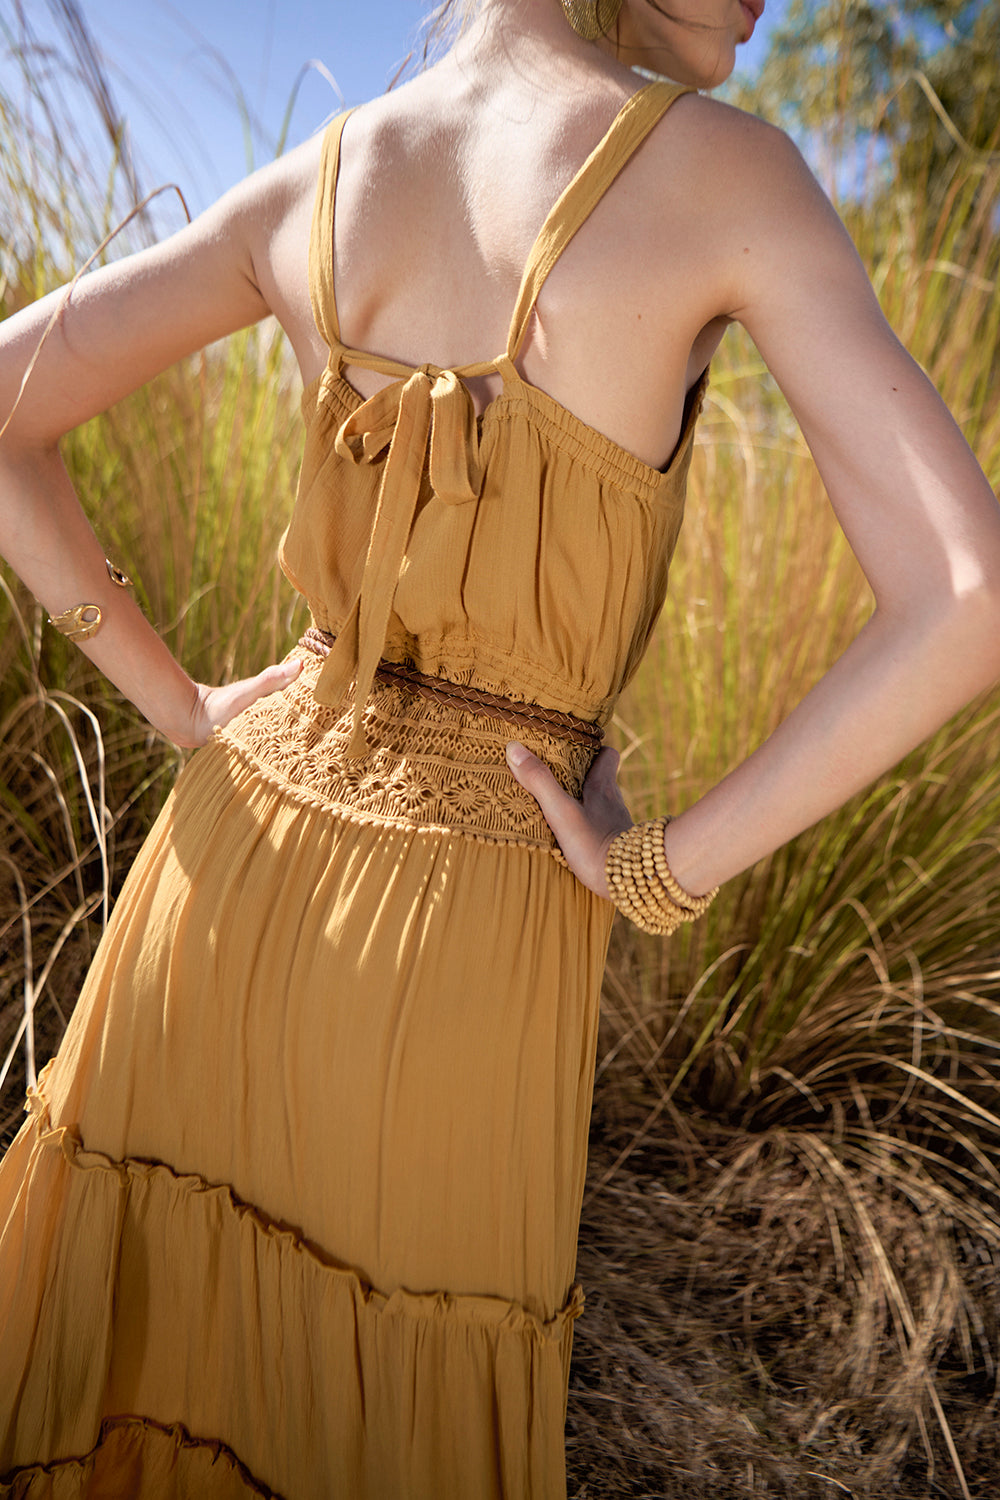 Rosalie Round Plaited Belt - Tan - The Fields of Gold by Tulle and Batiste